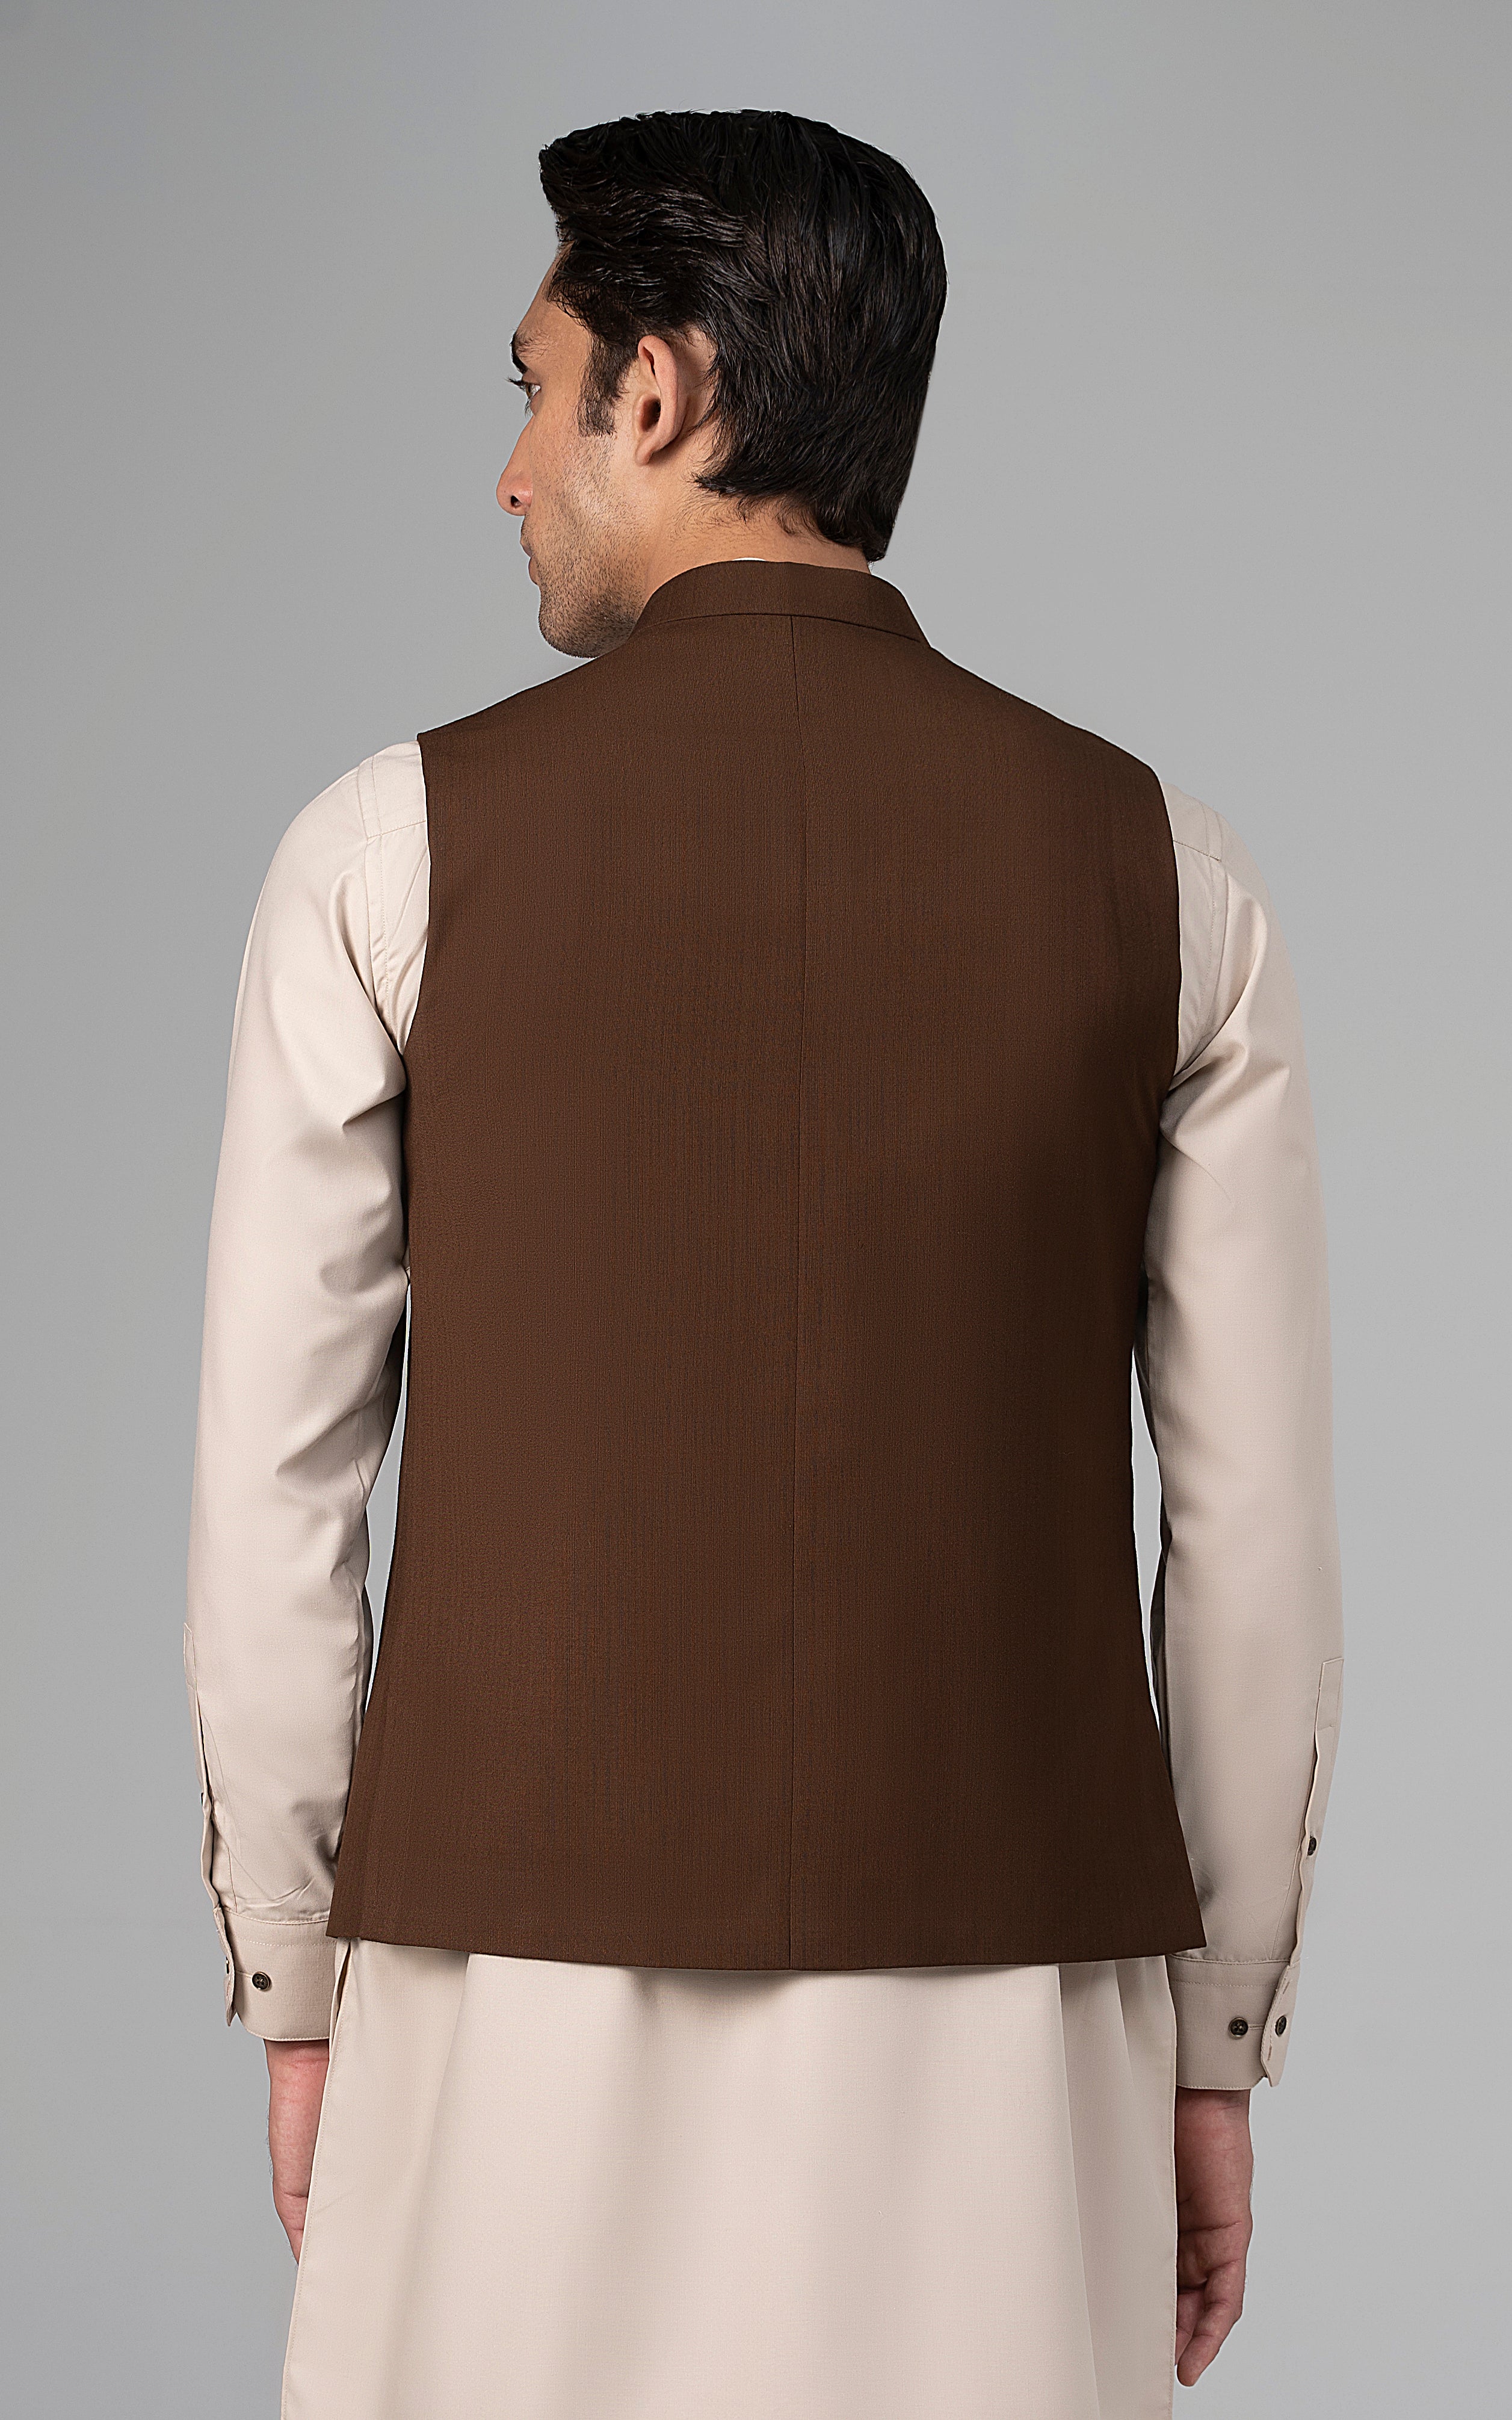 TROPICAL LOGO EMBROIDERED WAISTCOAT - SIGATURE COLLECTION BROWN